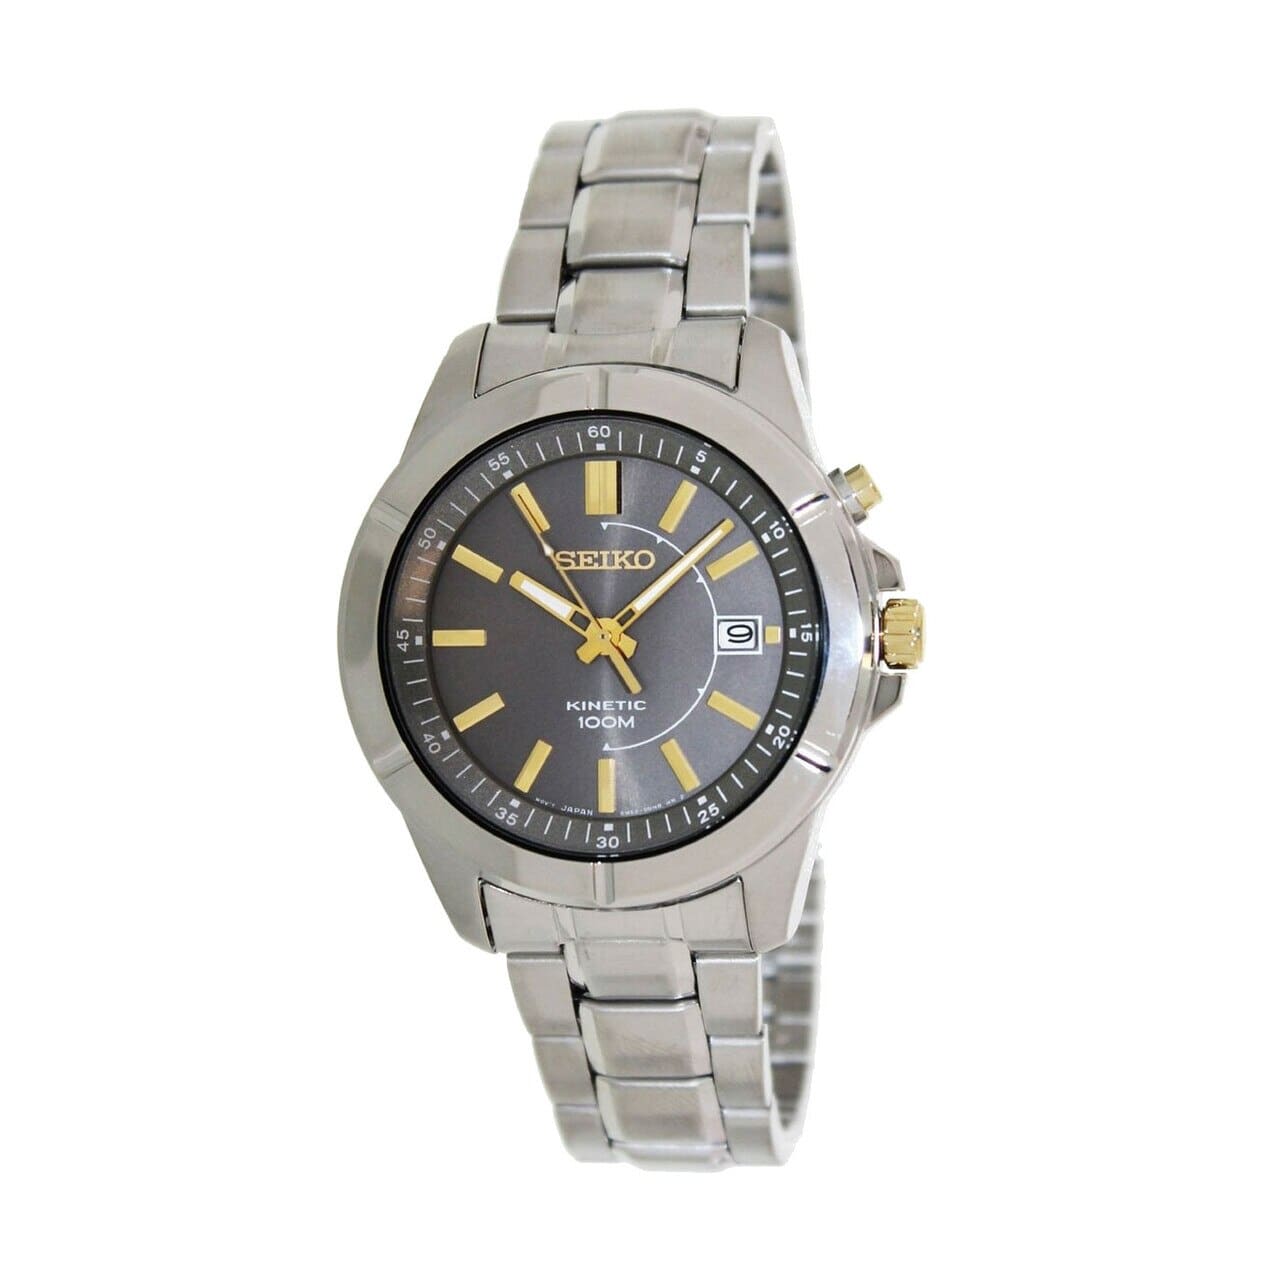 Seiko SKA543P1 Kinetic Silver Stainless Steel Grey Dial Men's Watch 029665168009